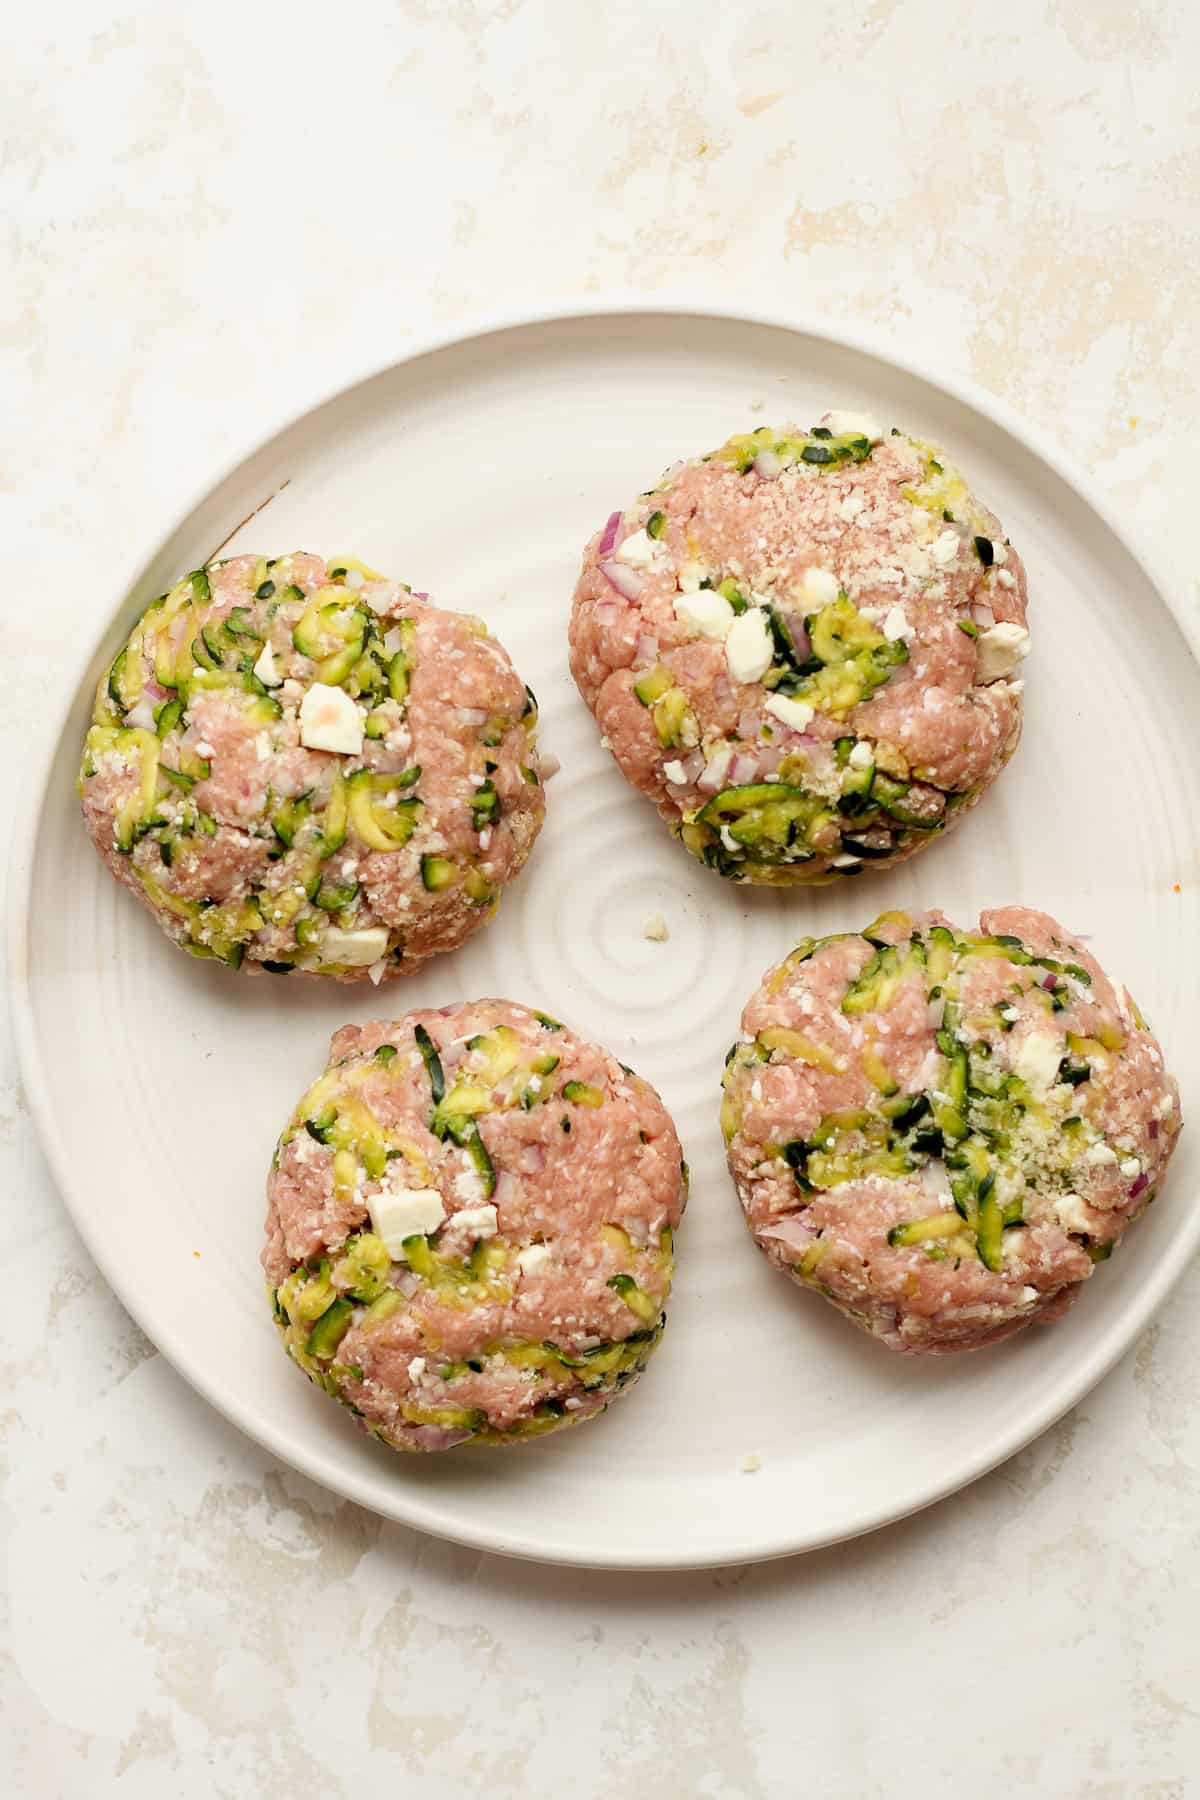 Overhead view of a plate of raw turkey burgers with zucchini and feta cheese.